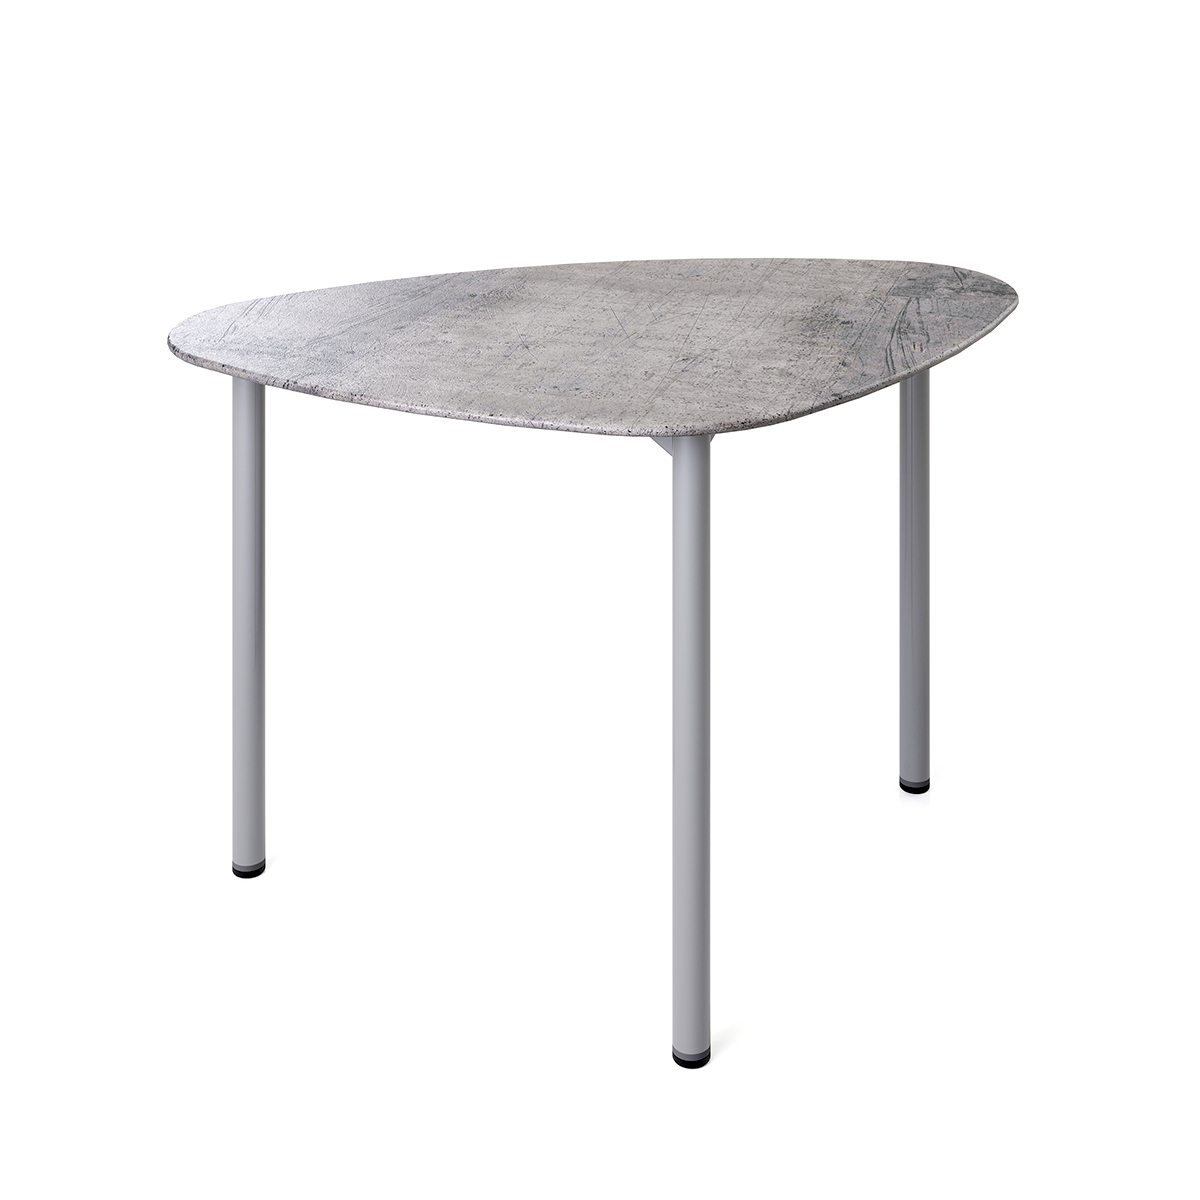 Flowform™ Outdoor Clamshell Table